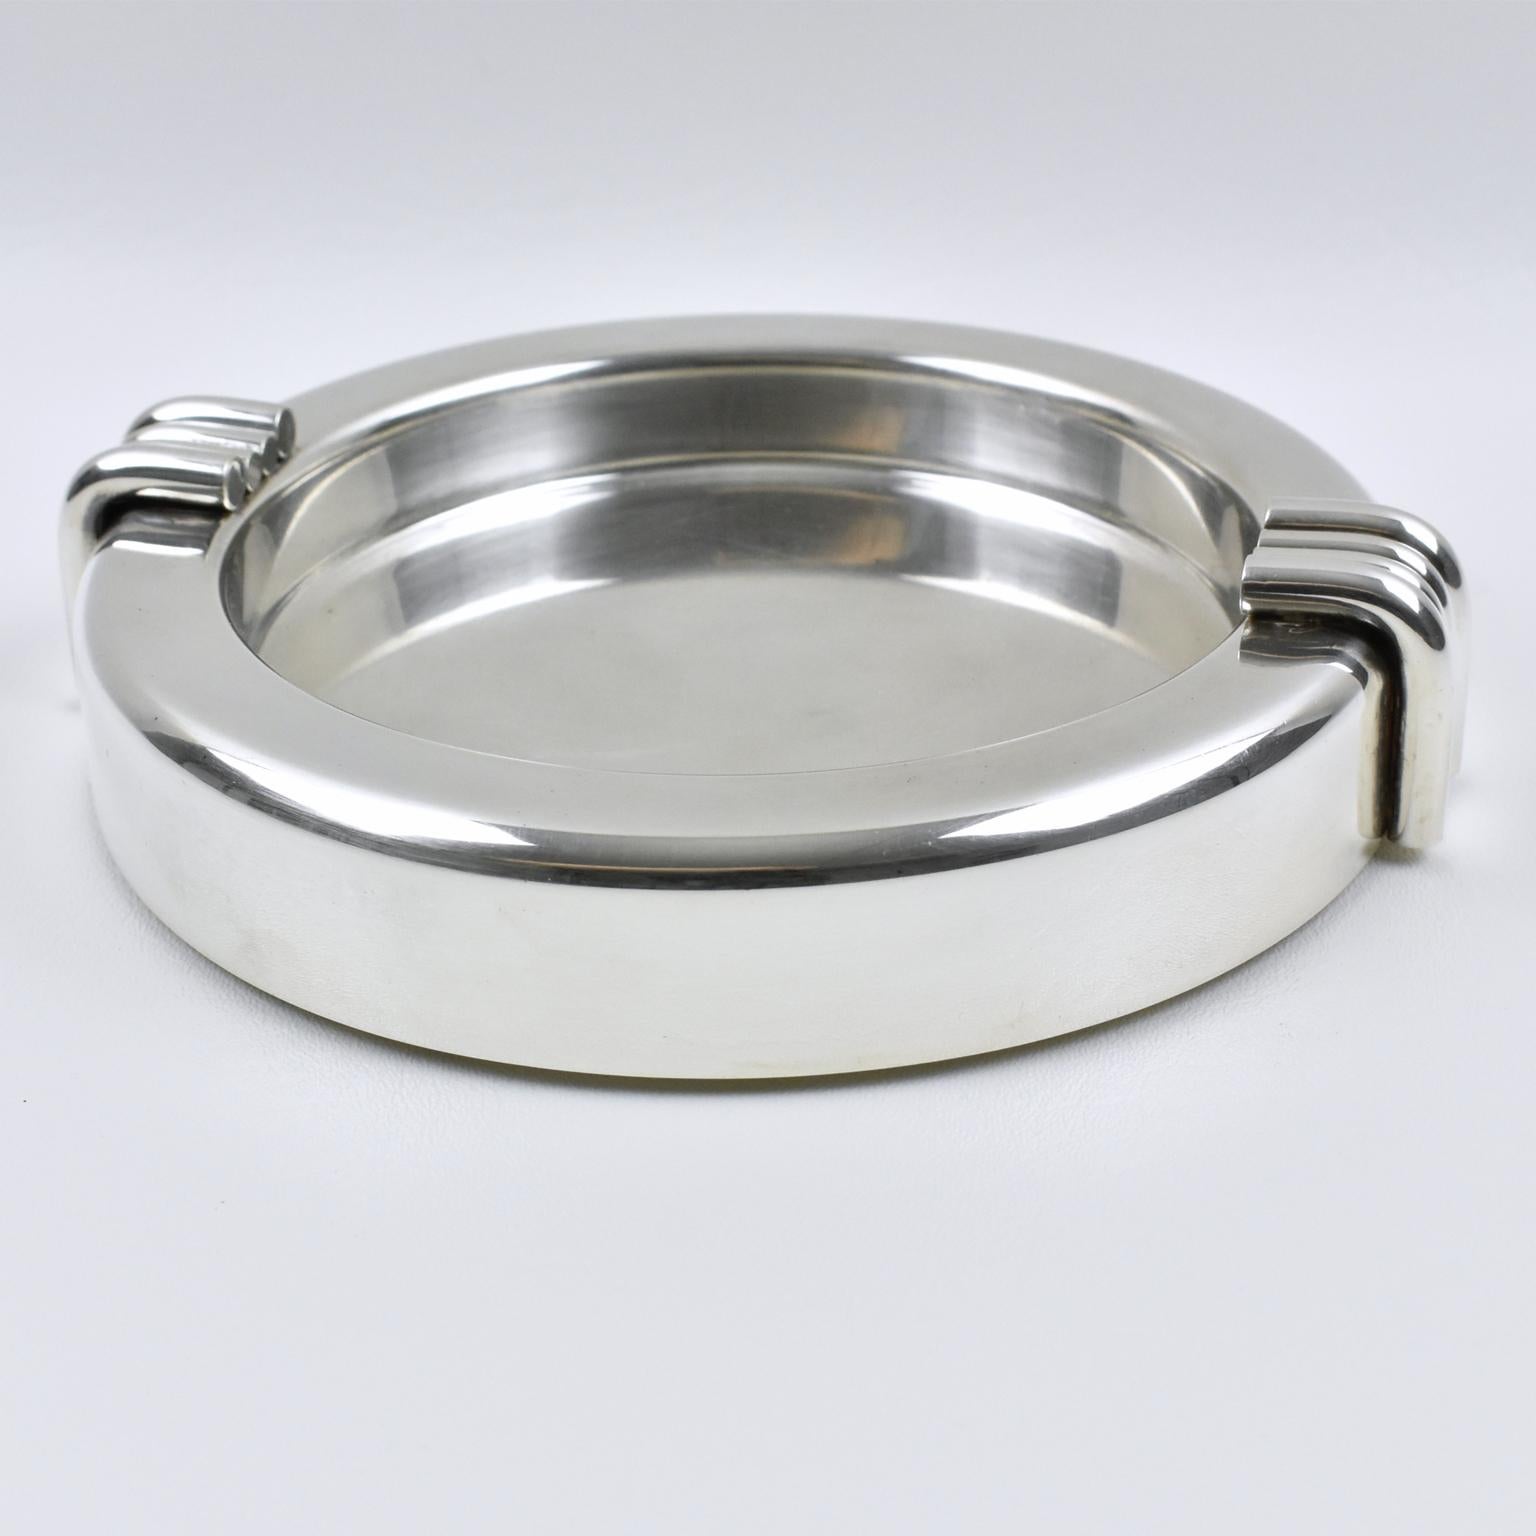 Christian Dior Modernist Silver Plate Large Cigar Ashtray Desk Tidy Catchall 2